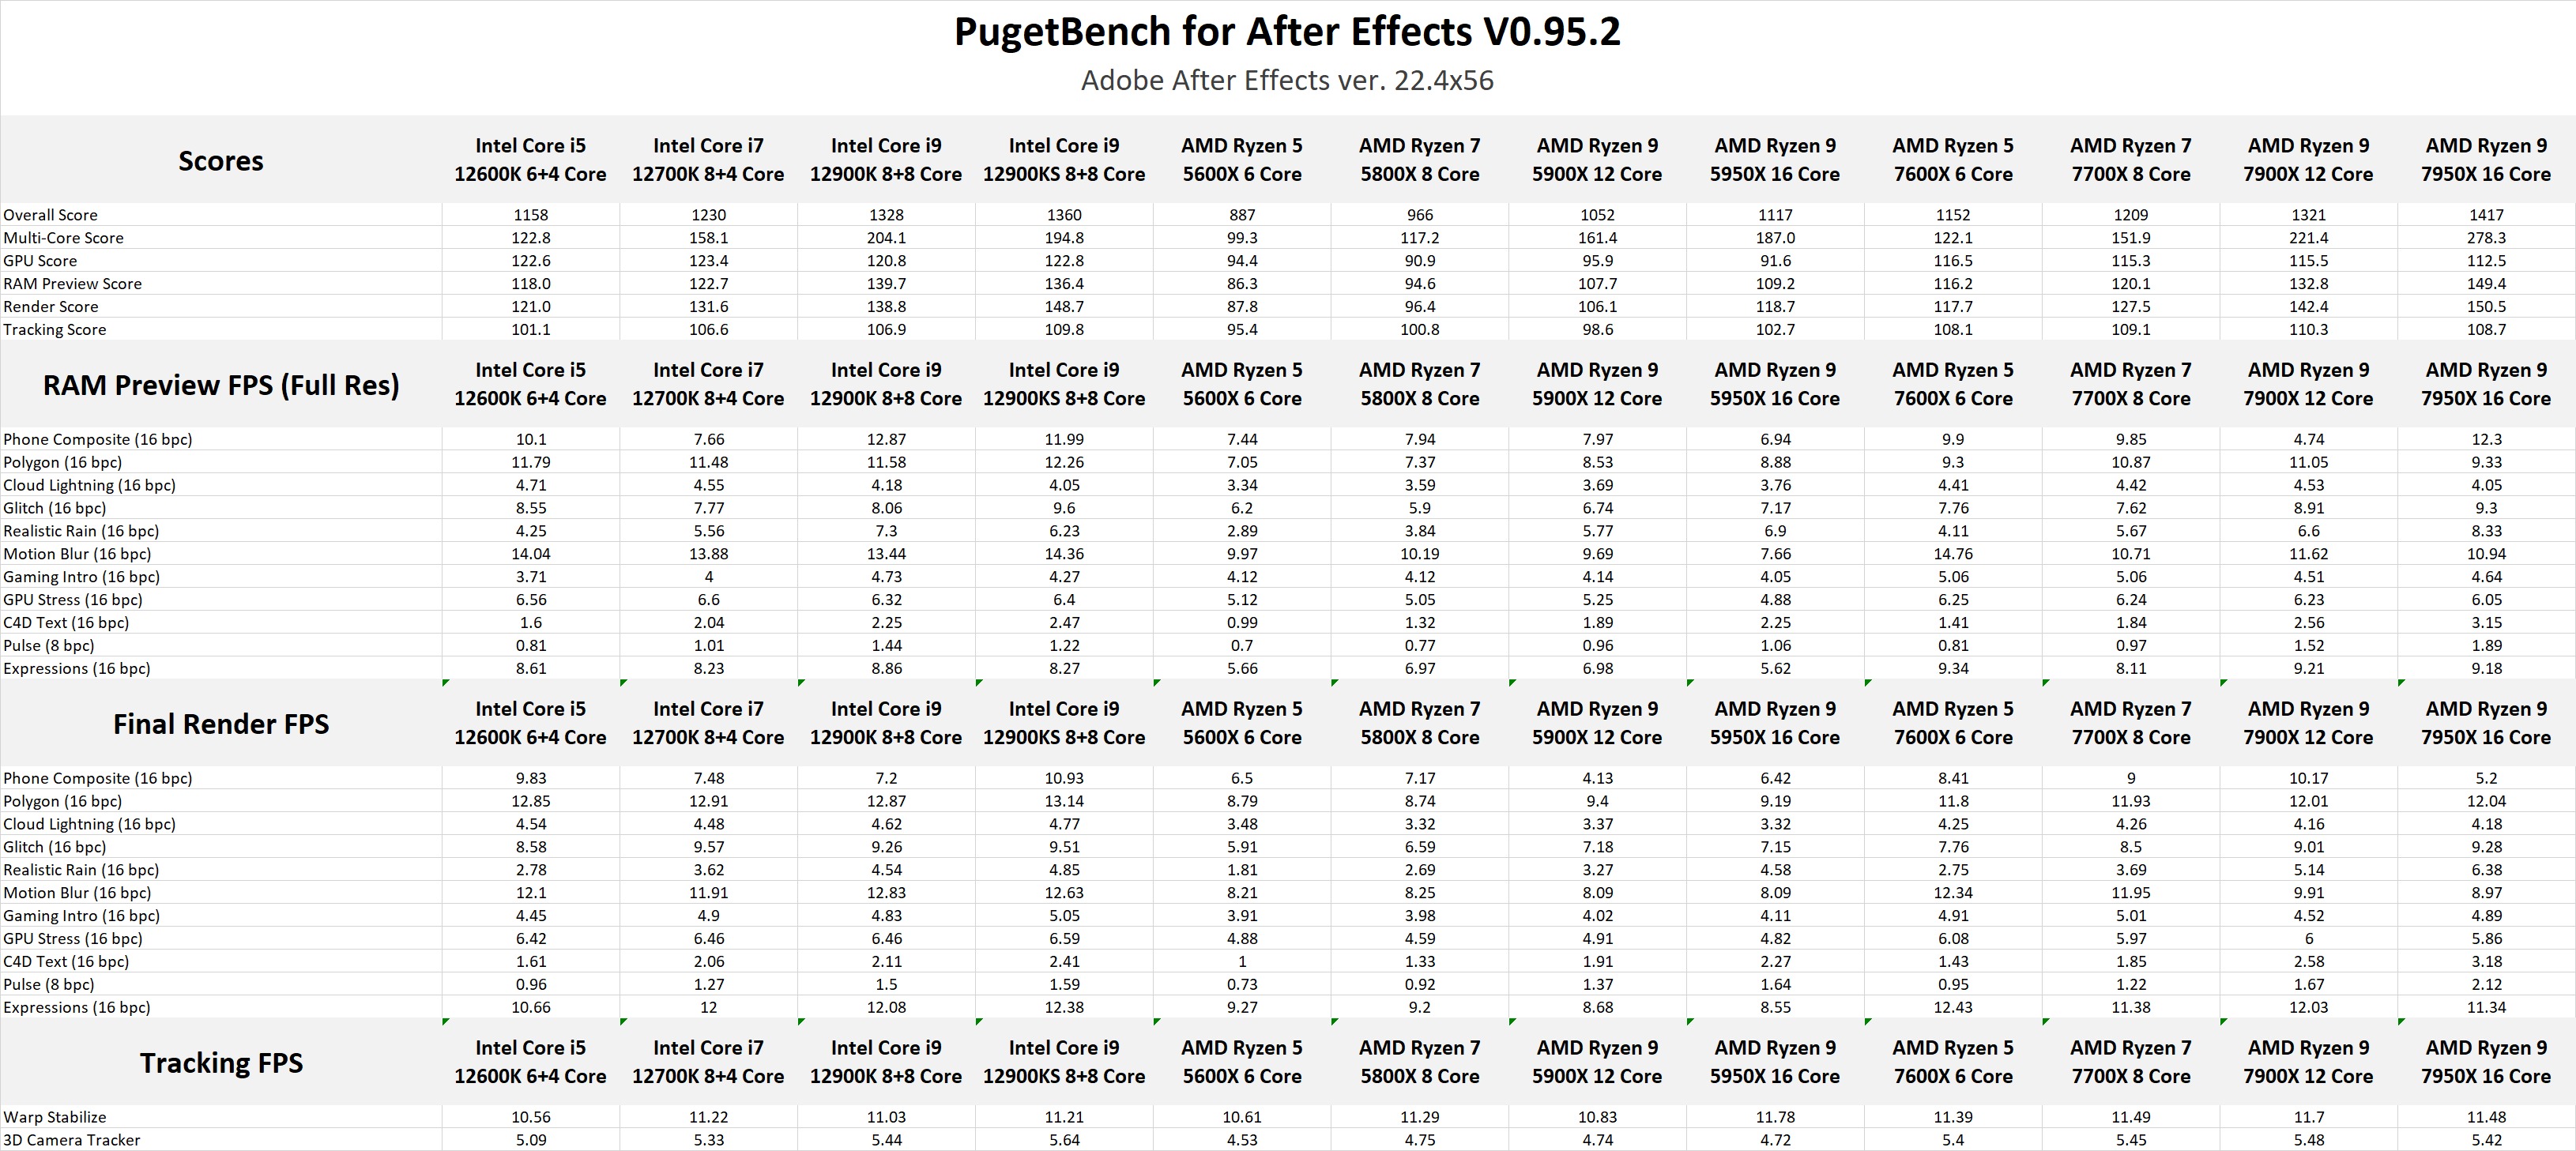 PugetBench for After Effects AMD Ryzen 7000 raw results